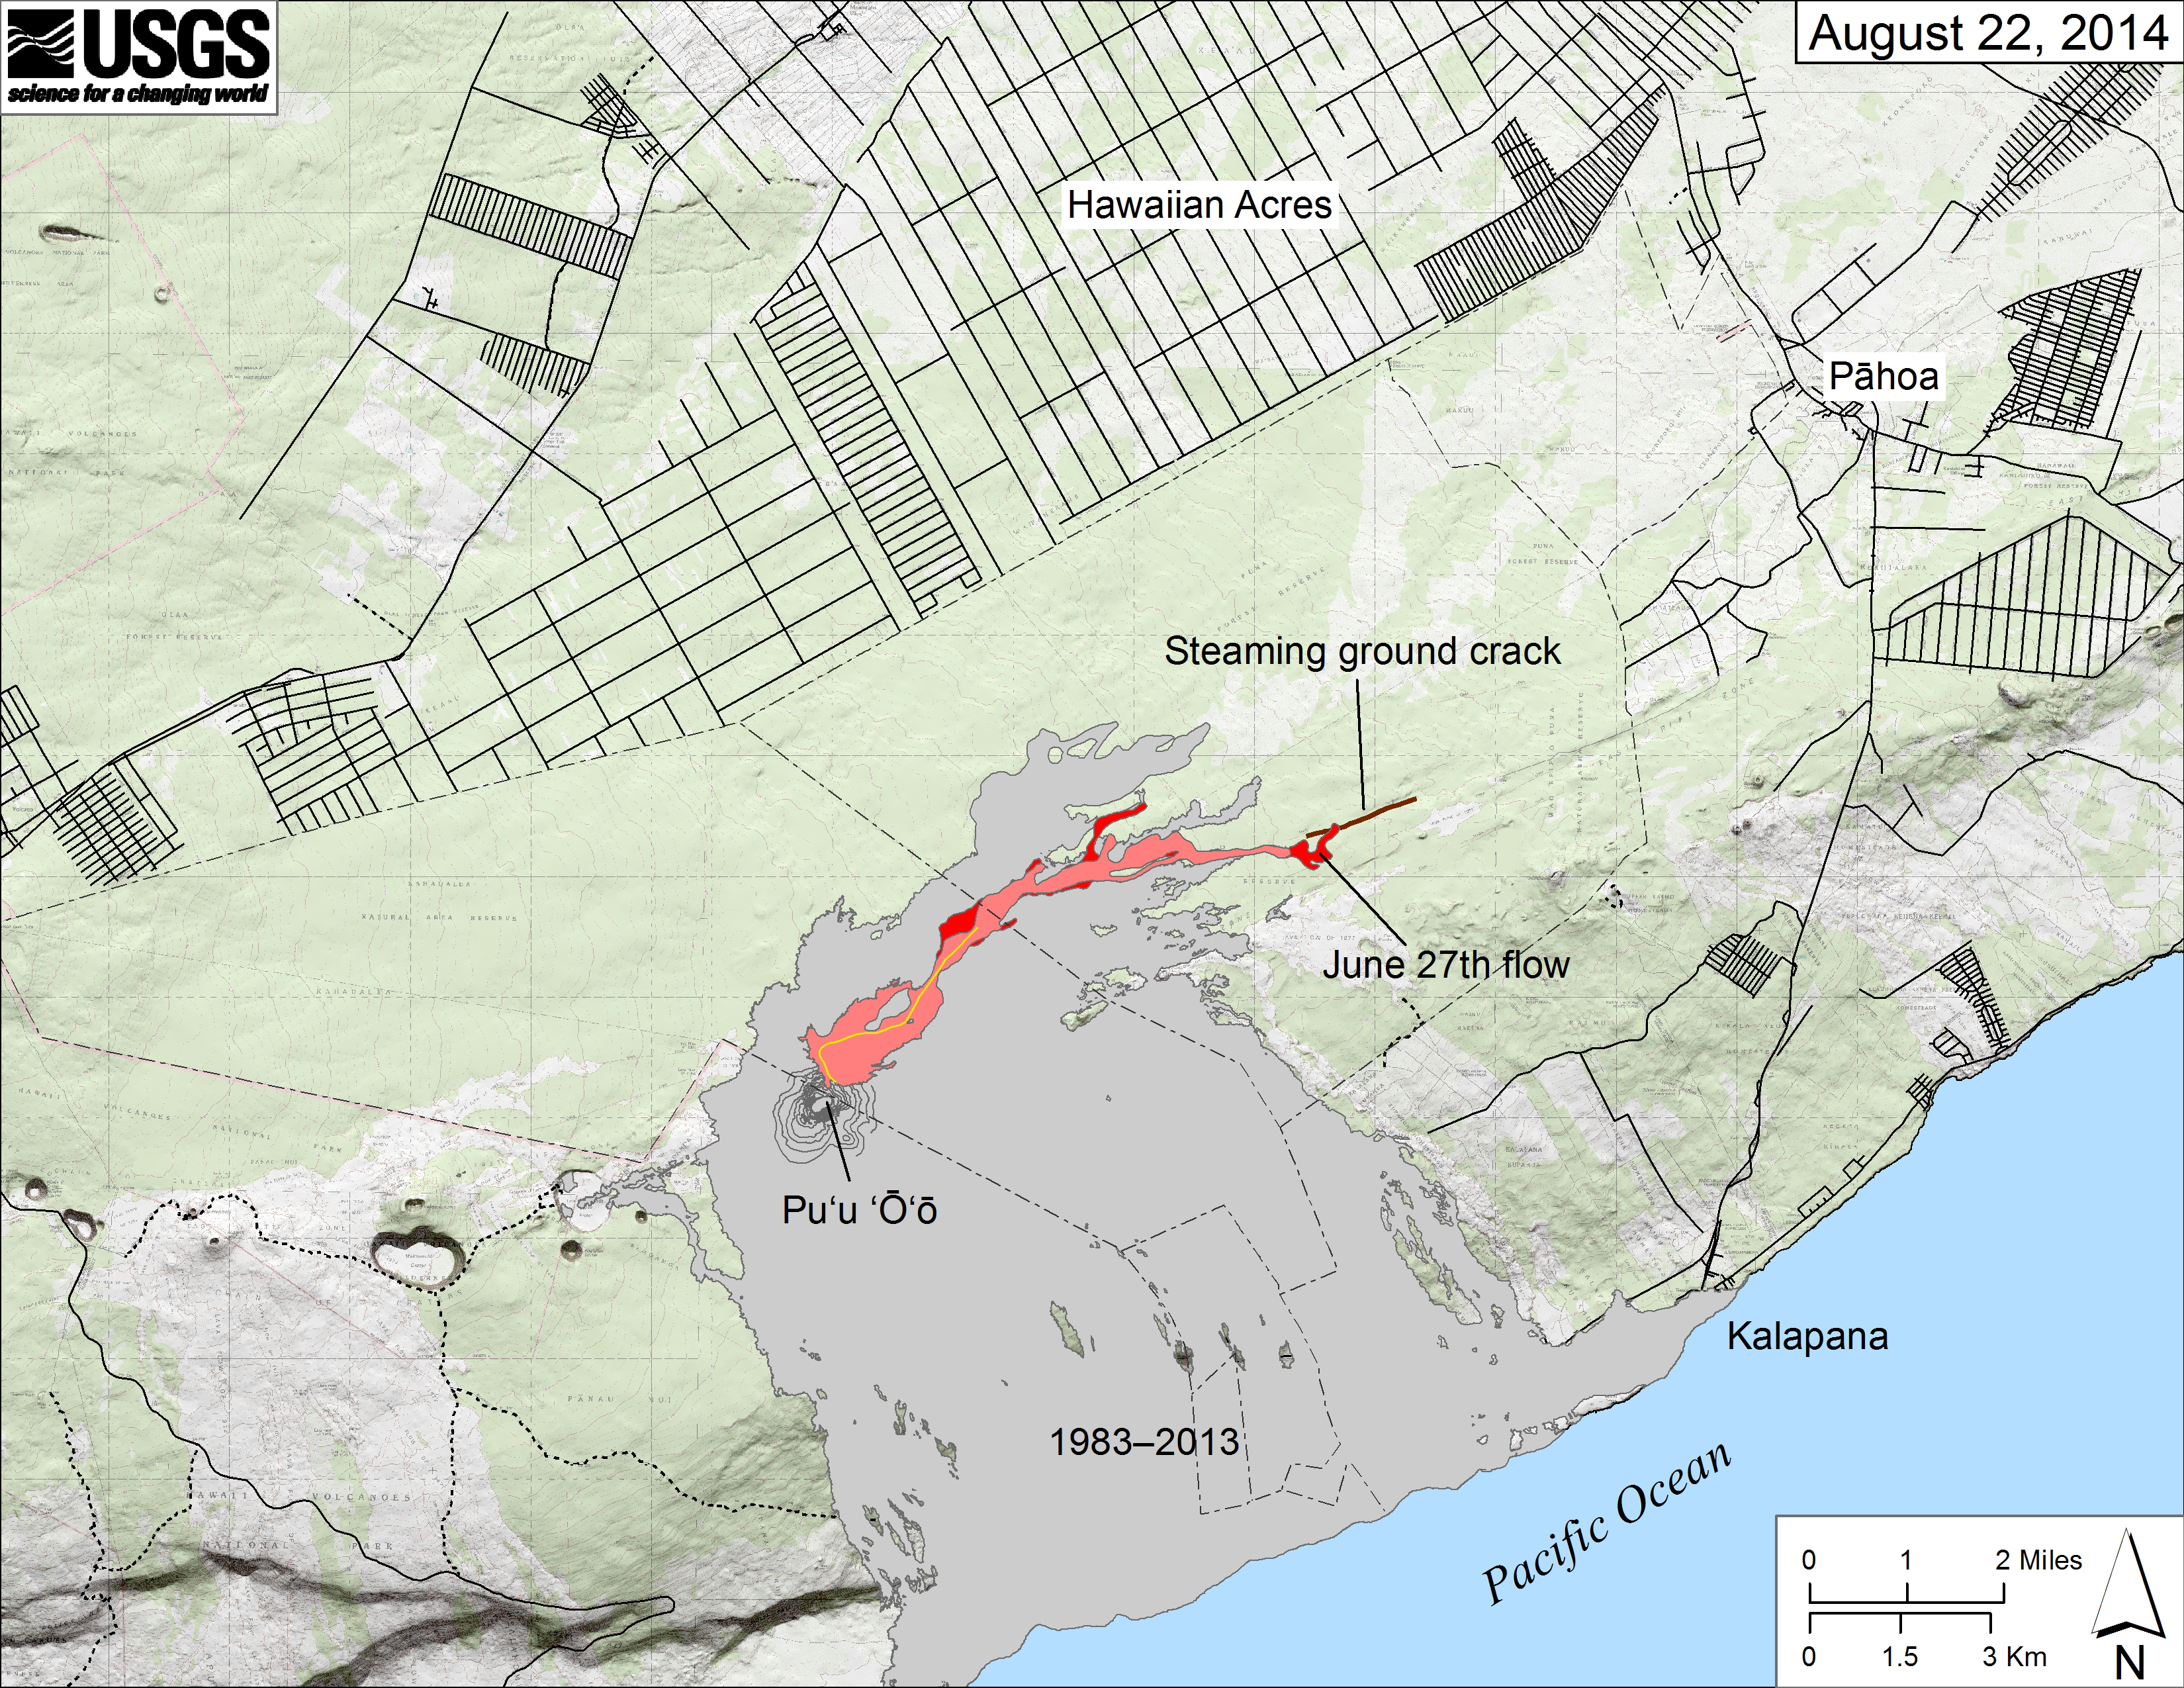 Map of June 27th flow in Kilauea’s East Rift Zone,  posted on August 22, 2014 